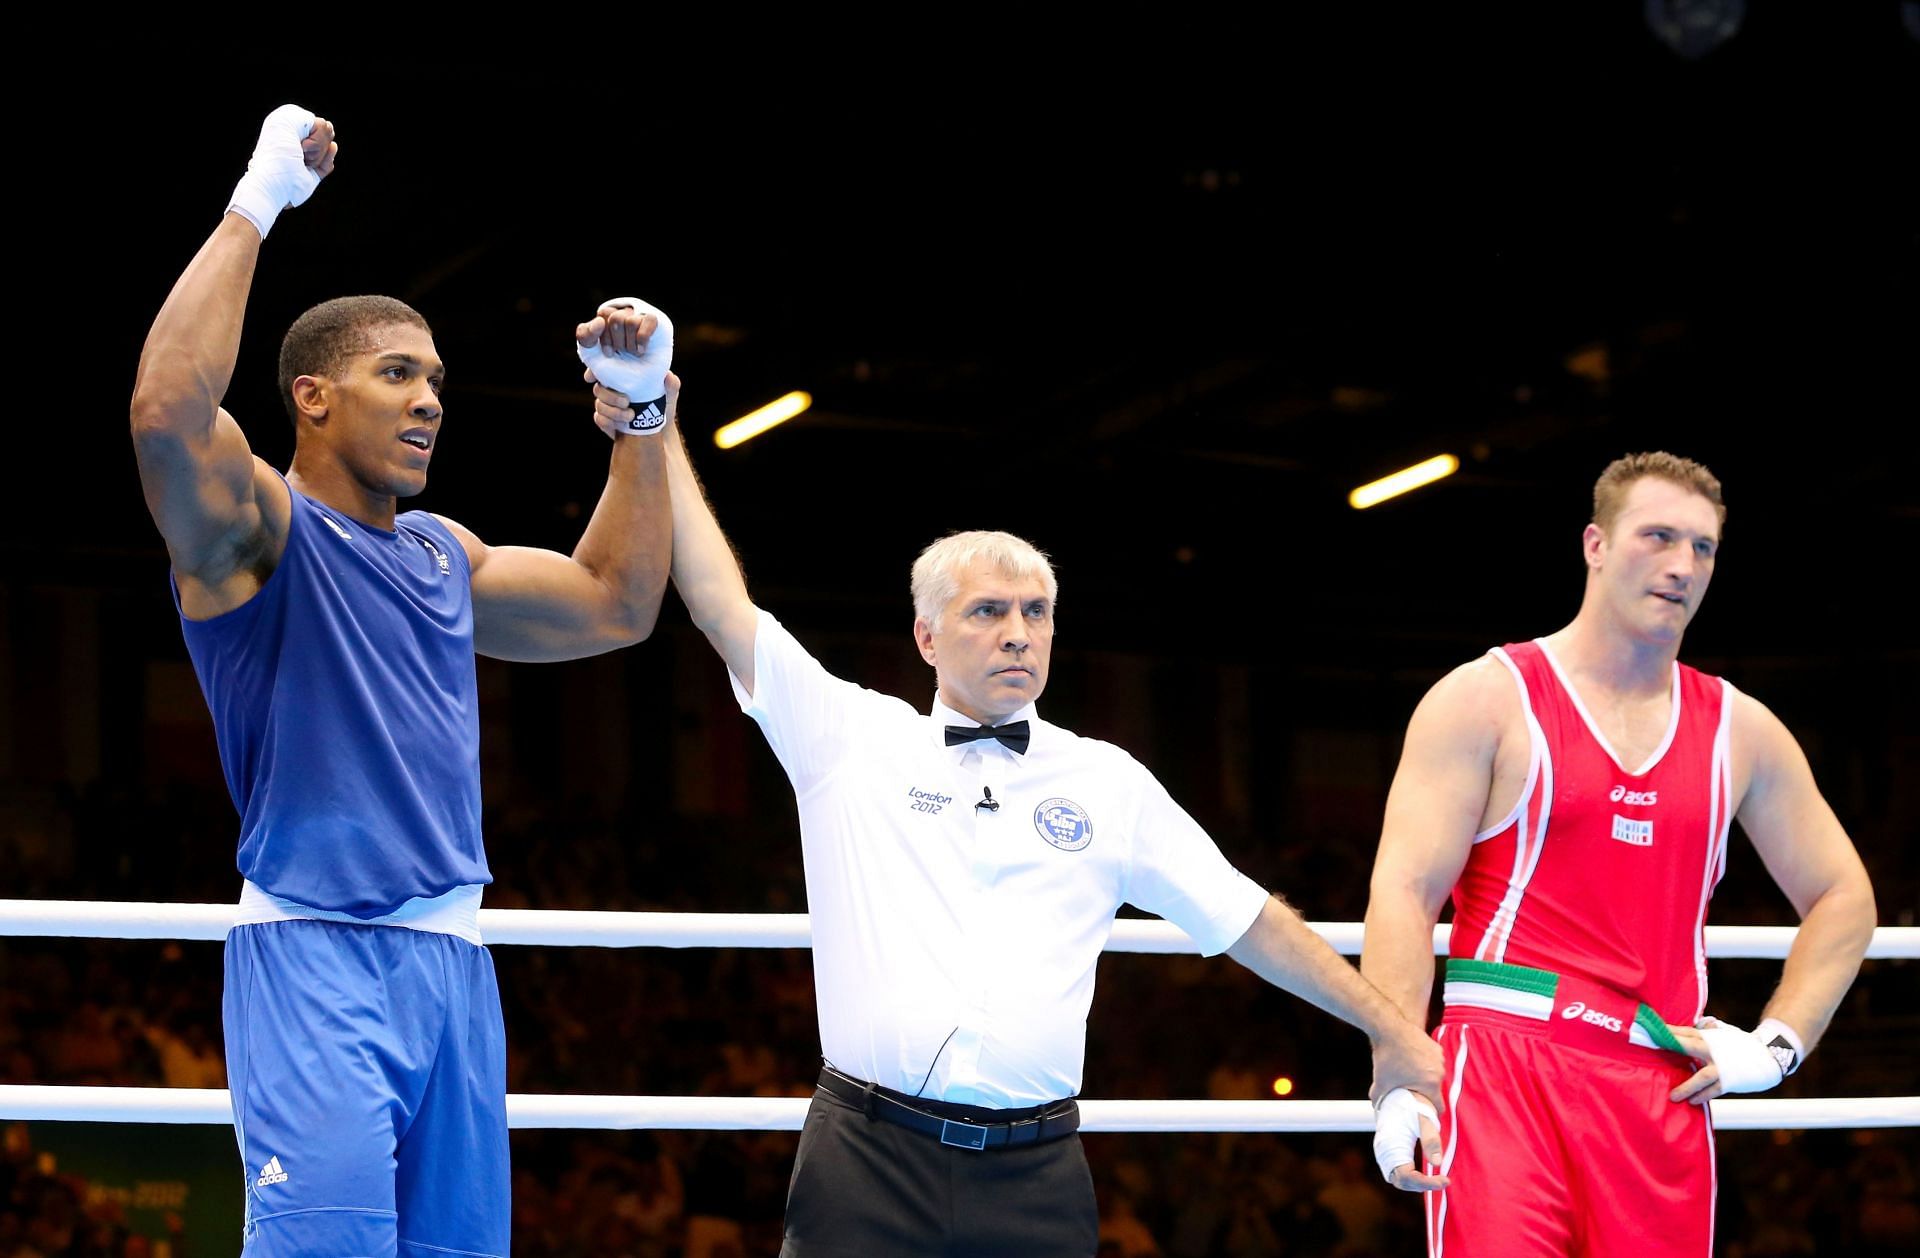 Anthony Joshua getting his hand raised as Olympic champion.